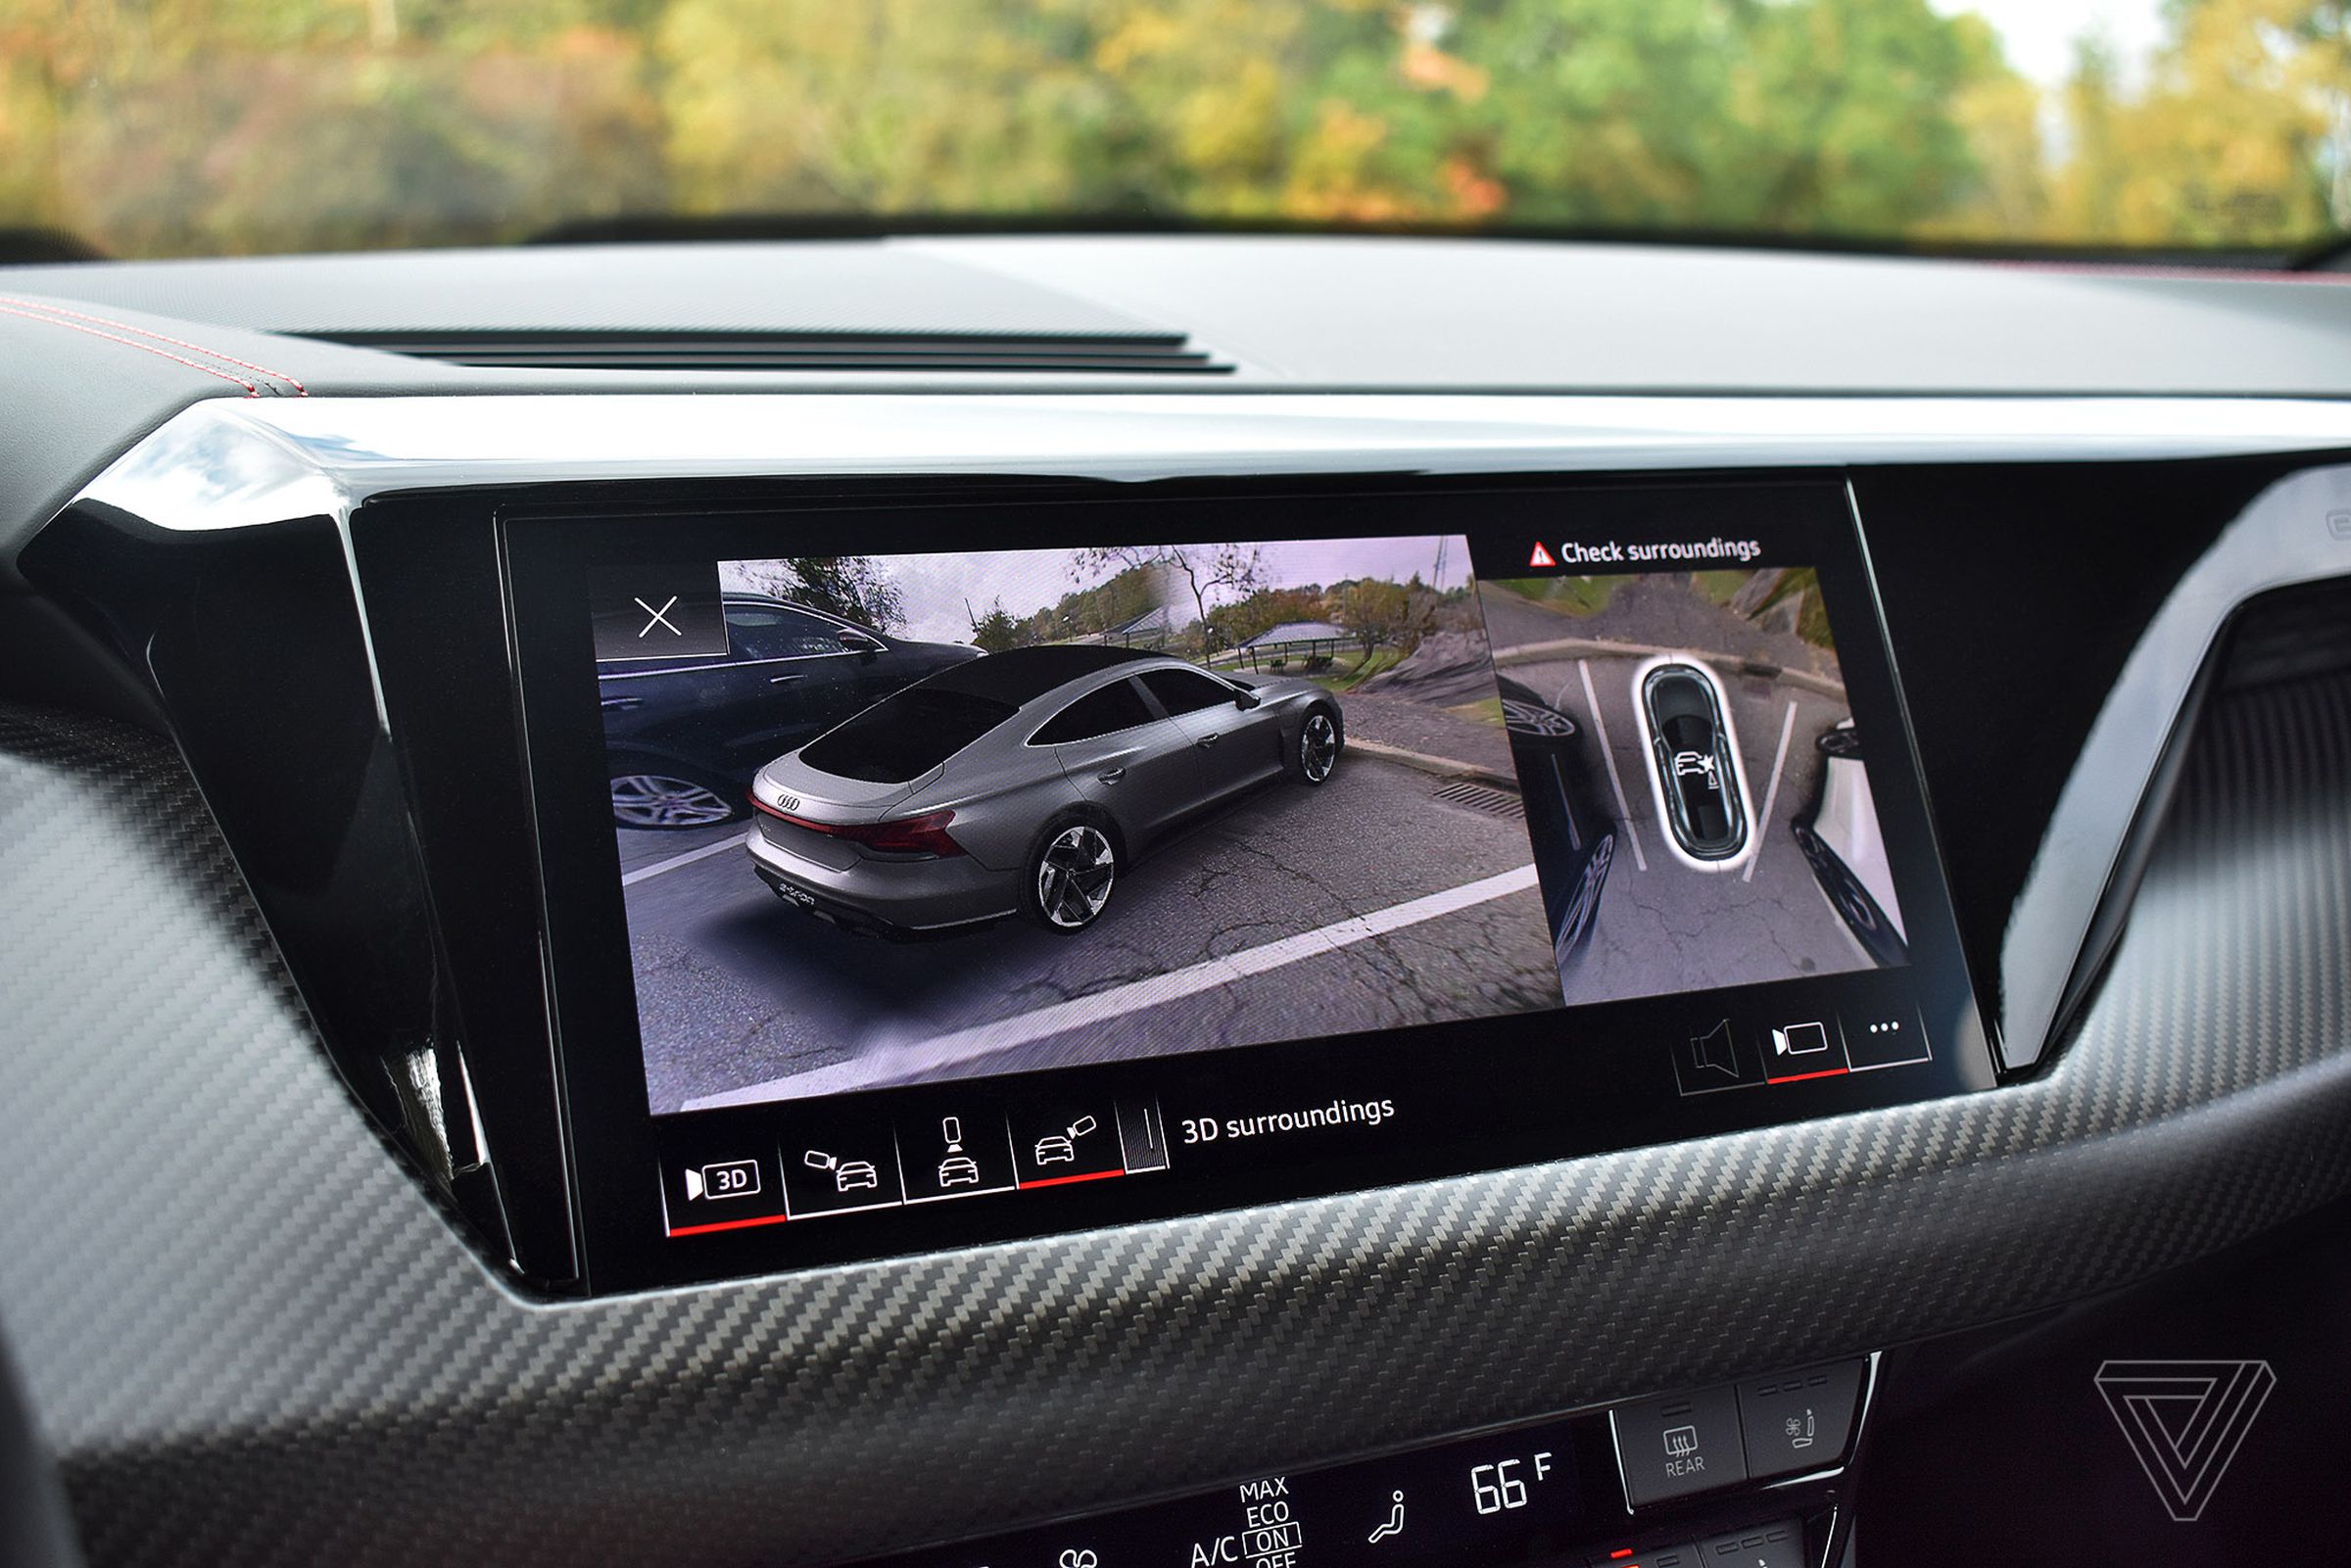 The rear-facing camera also offers a cool 3D rendering of the vehicle.